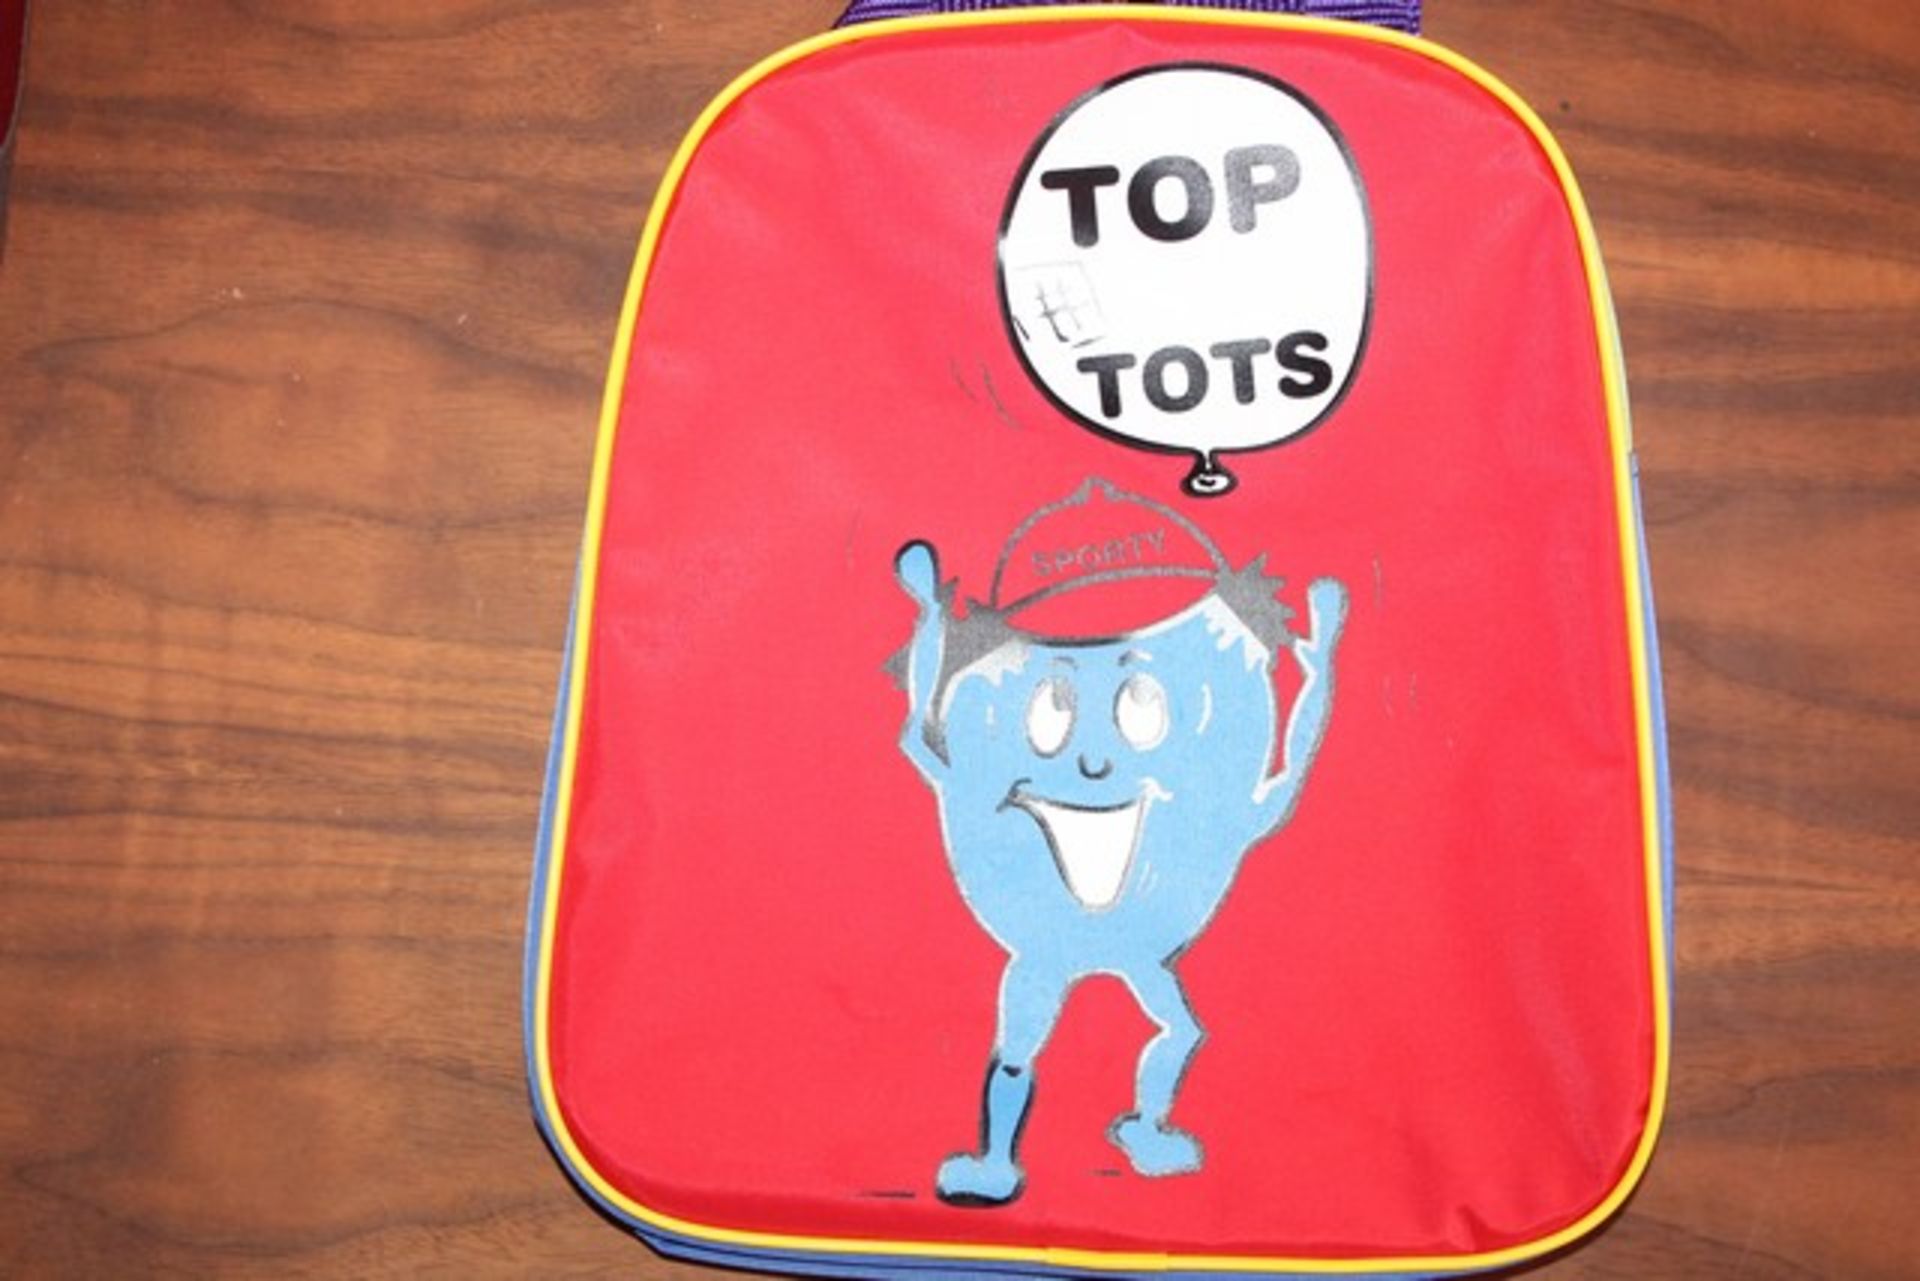 5 x TOP TOTS SPORTS BAGS   *Please note that the bid price is multiplied by the number of items in